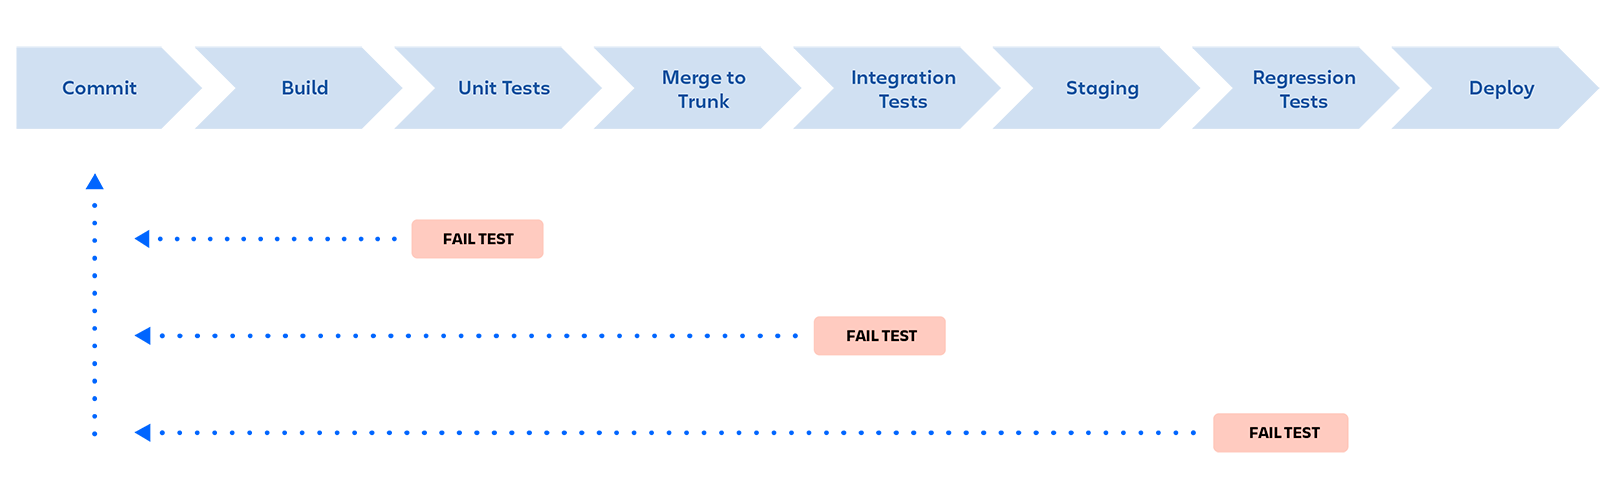 DevOps Pipeline: Commit, Build, Unit Tests, Merge to Trunk, Integration Tests, Staging, Regression Tests, Deploy. Pipeline is stopped if a tests fails at any stage, and feedback is provided to the developer.